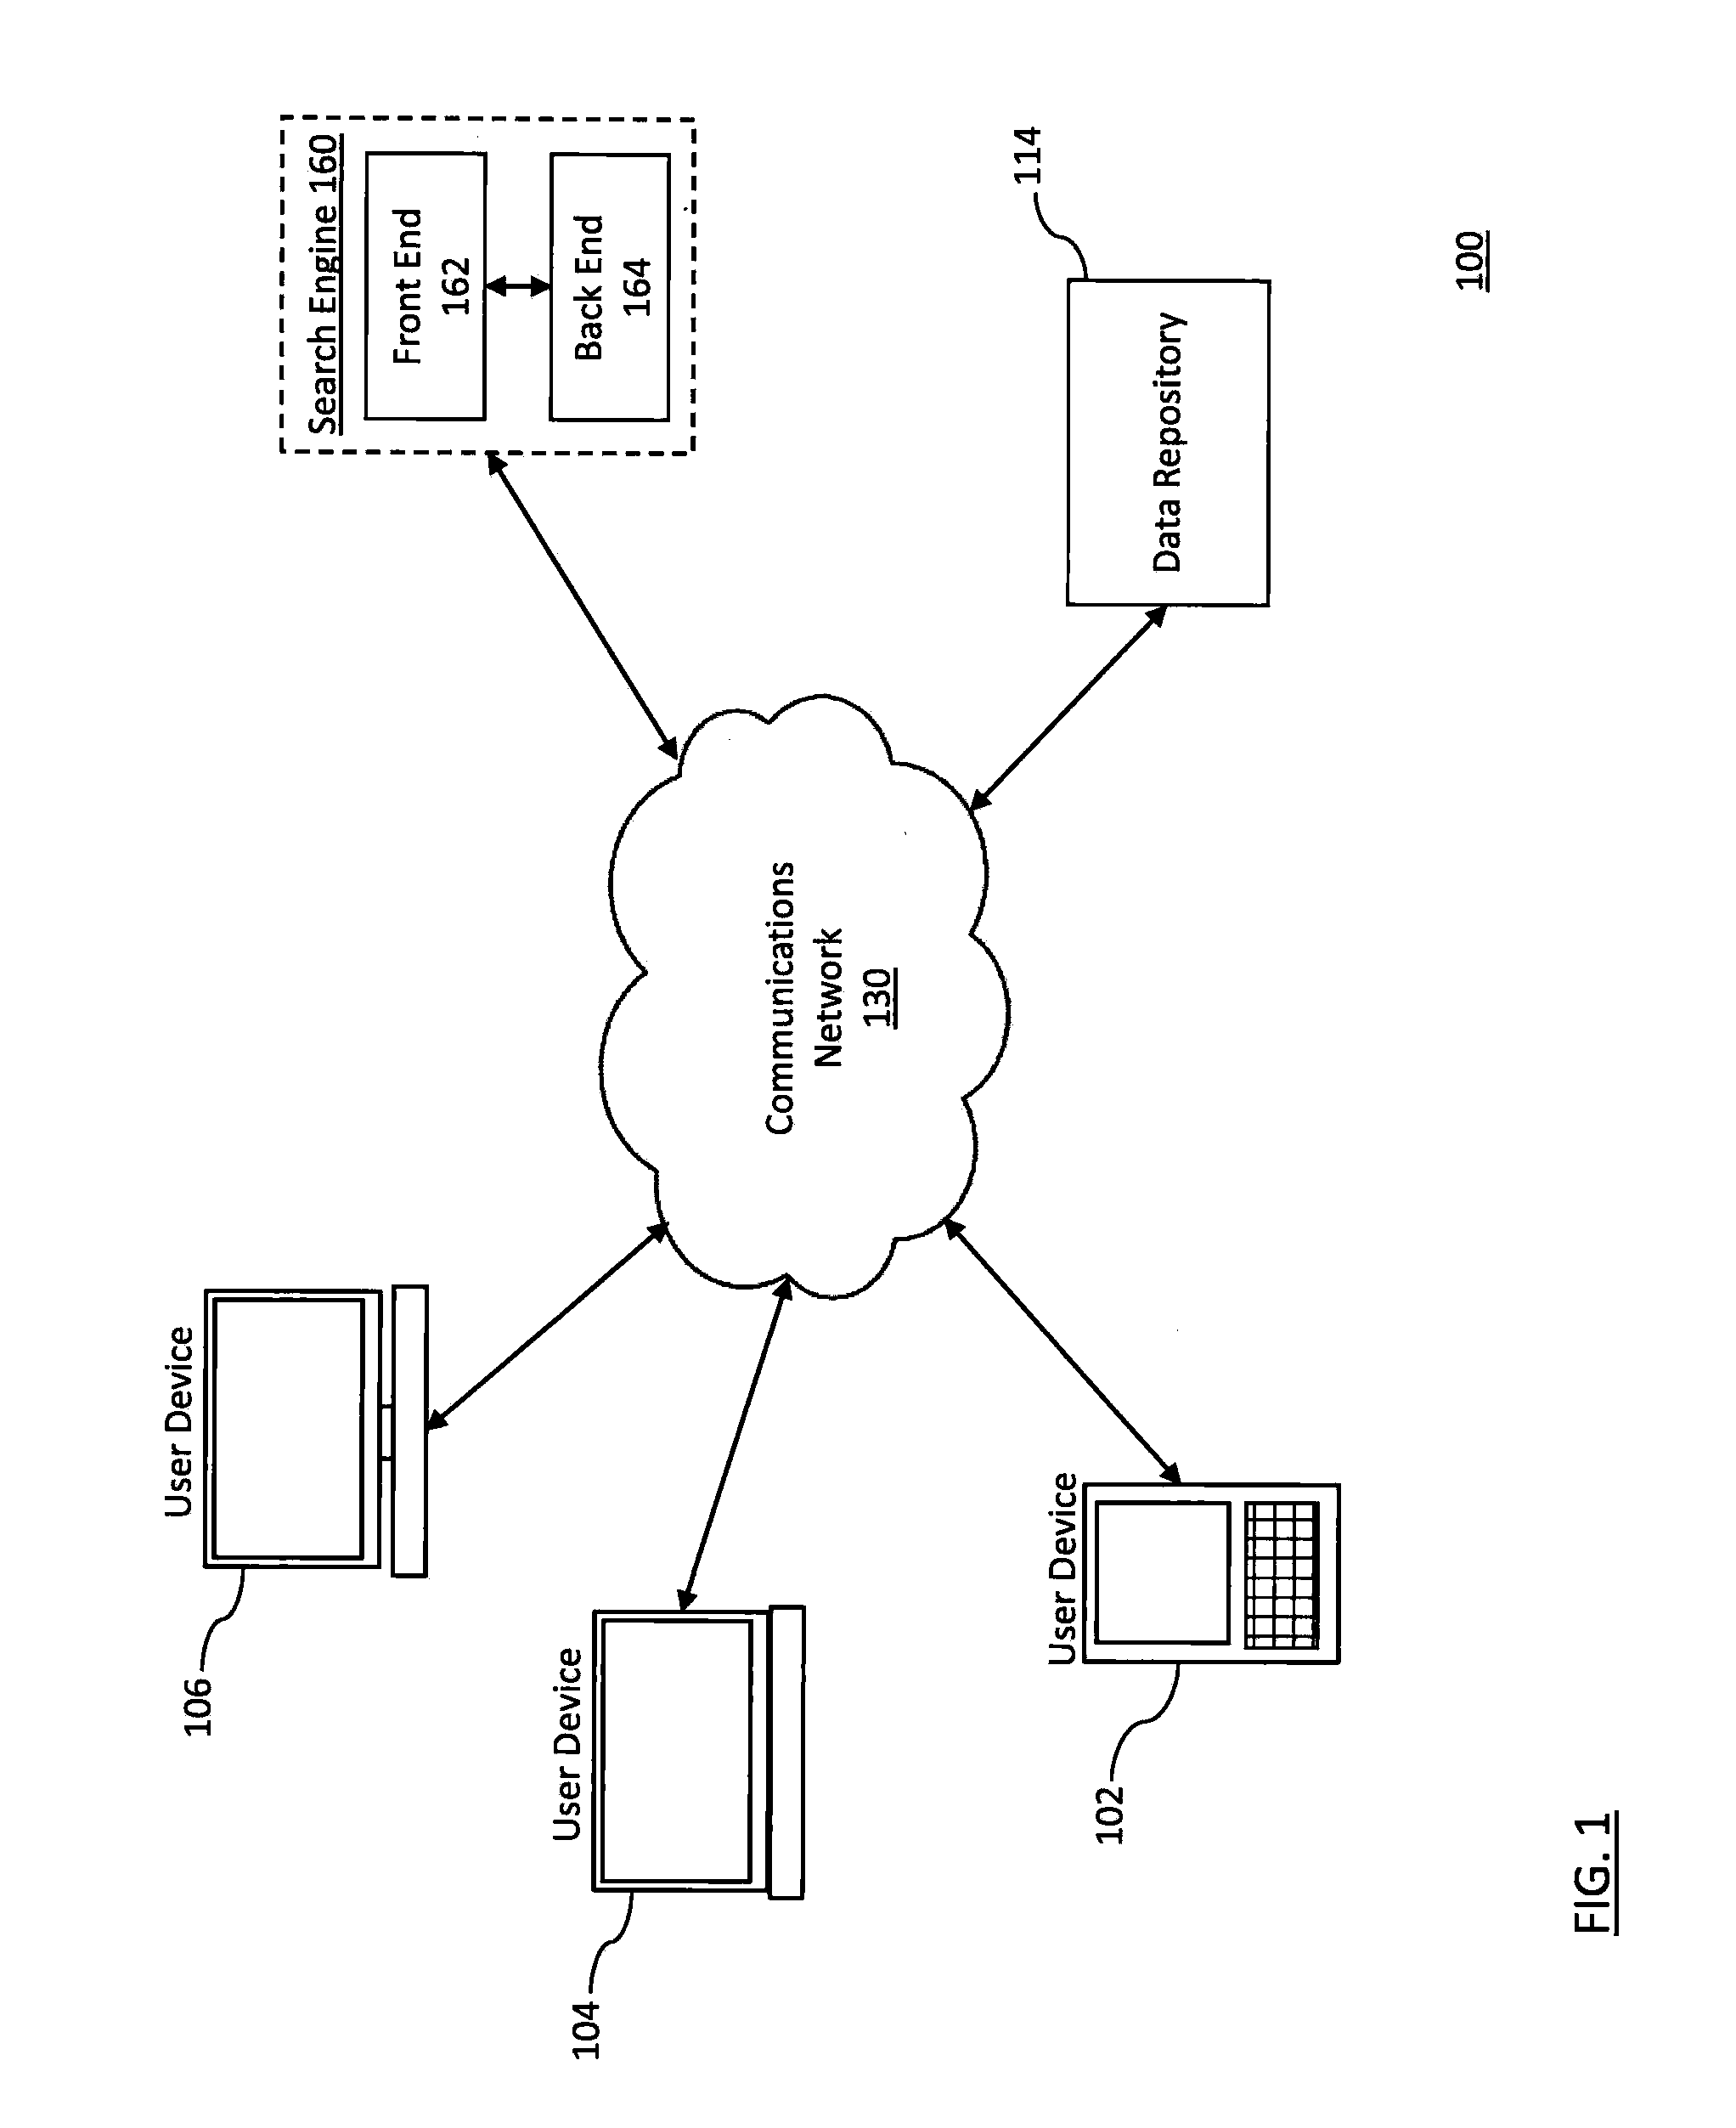 Systems and Methods for Improved Web Searching